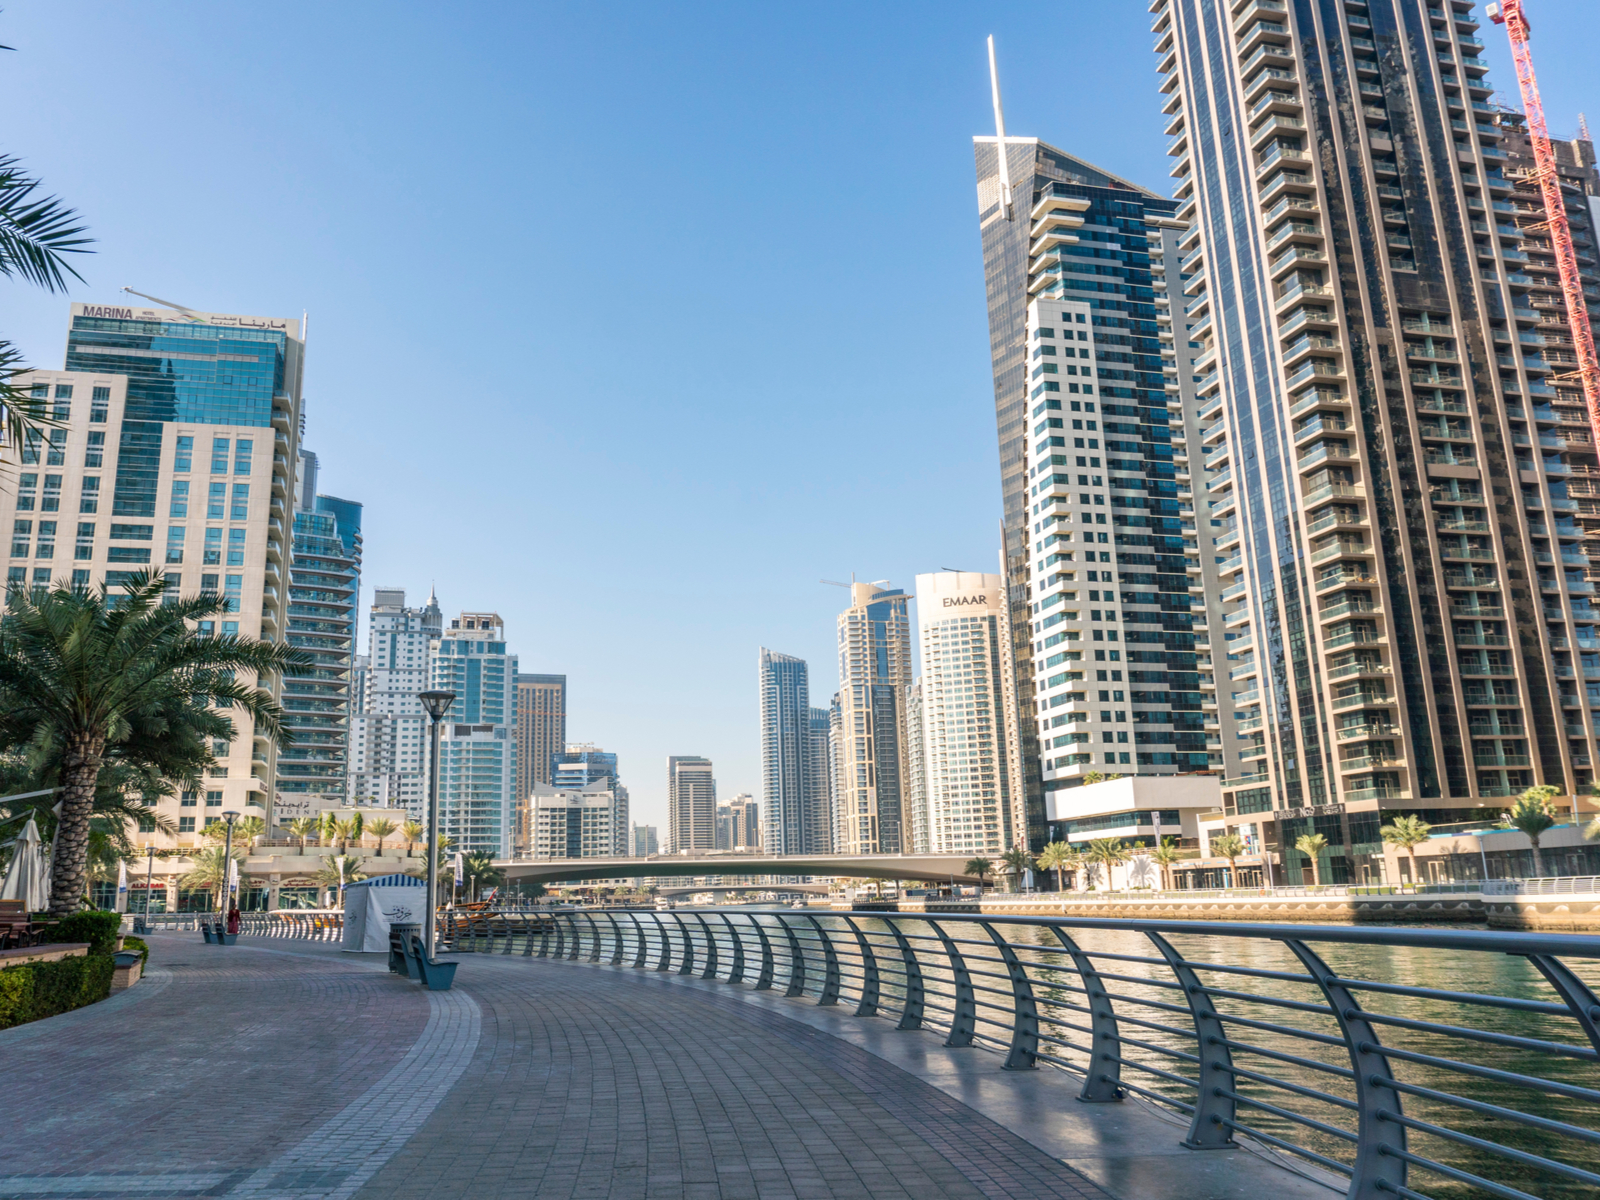 Dubai streets pictured during the least busy time to visit